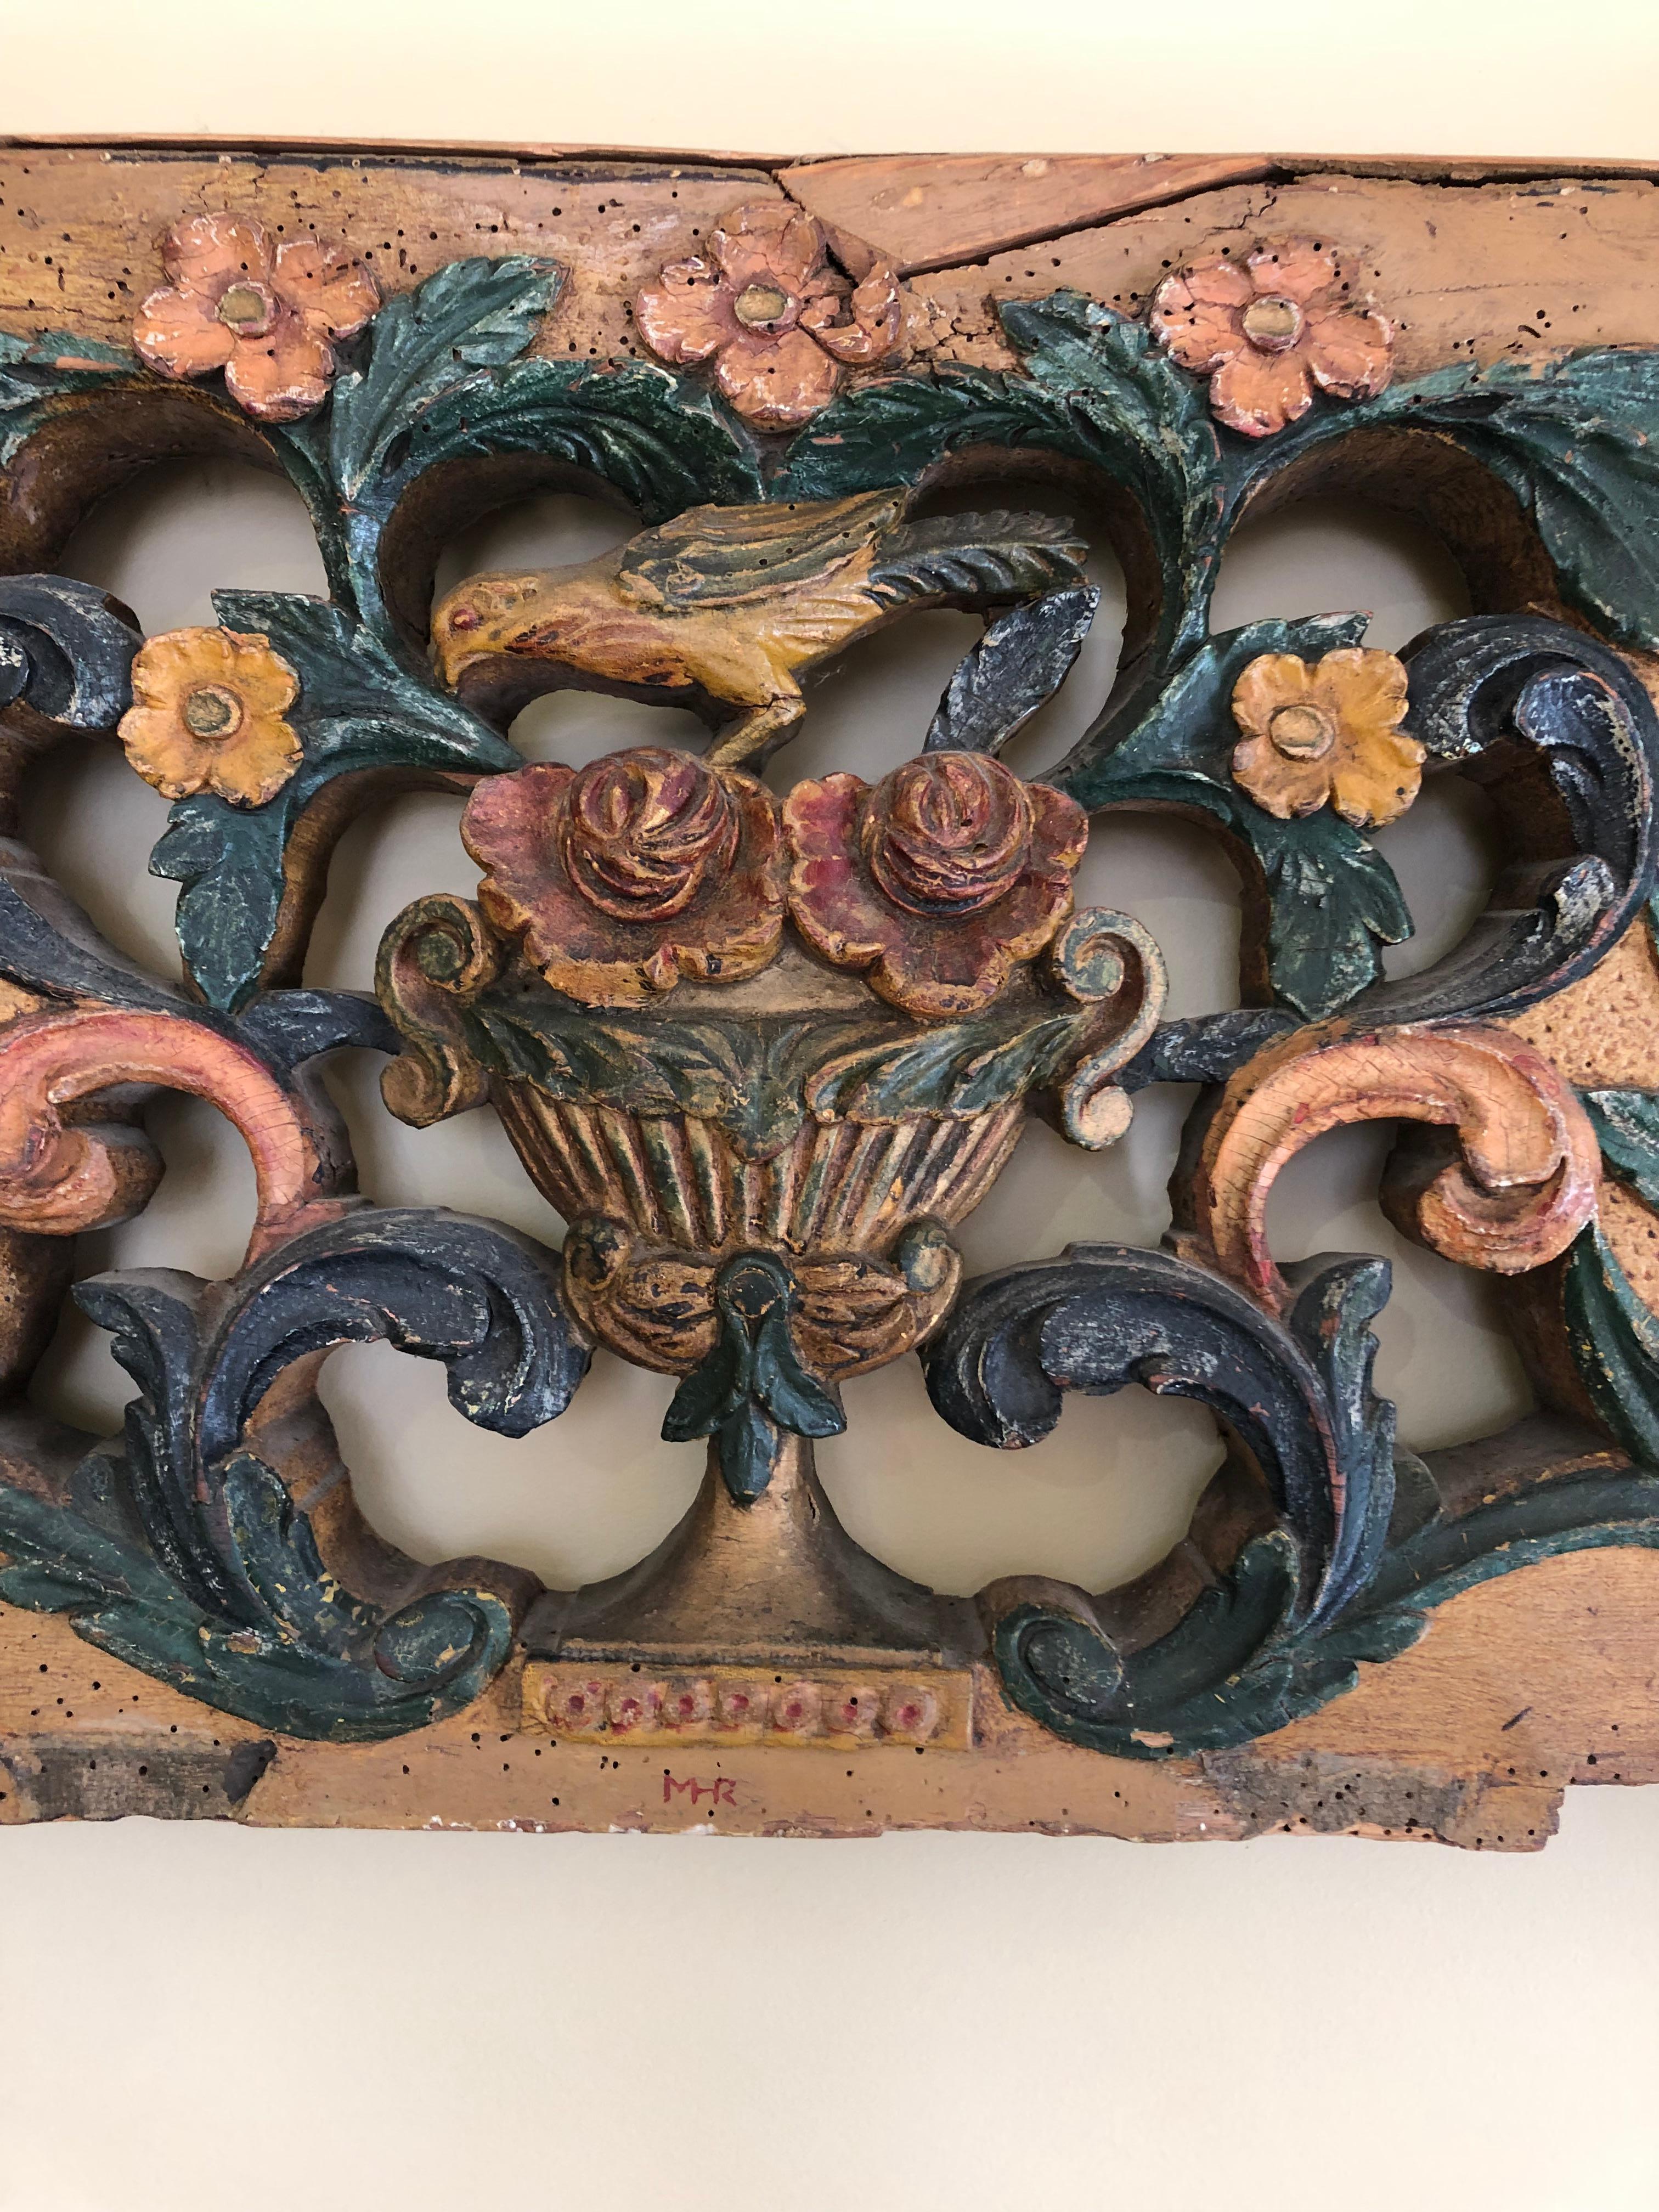 An eye catching architectural carved wood found object wall sculpture, probably once an overhead door adornment, having carved flowers in an urn with bird on top. Fabulous squiggly hardware on the front and foliage.